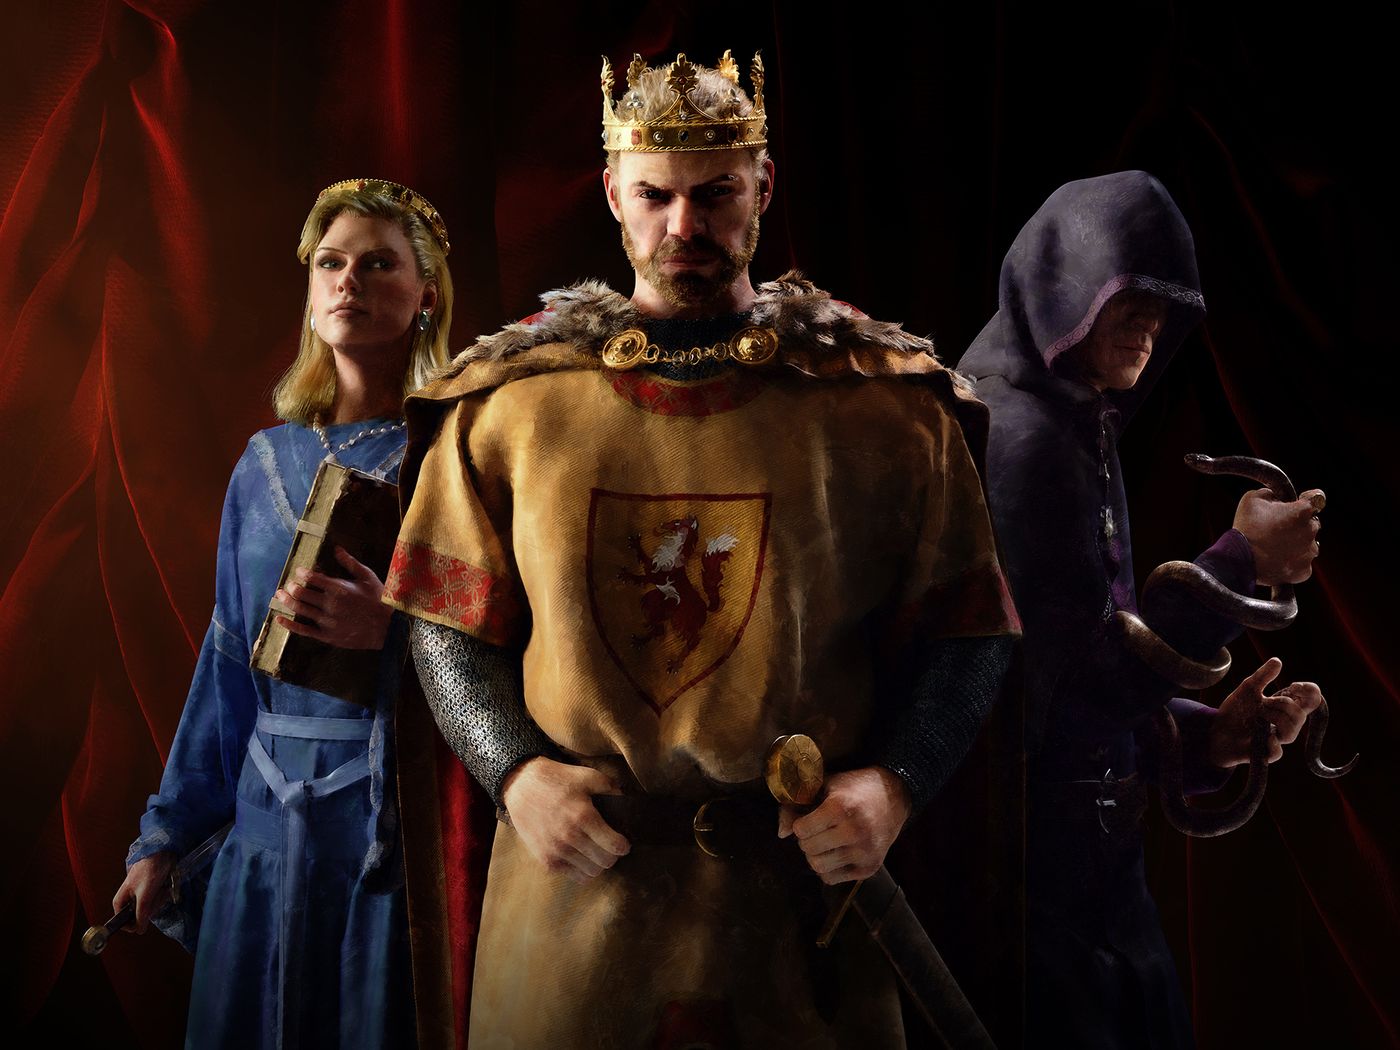 Image for Crusader Kings 3 players have cannibalized a pope, had 40m+ kids, and instigated 1.4m+ holy wars